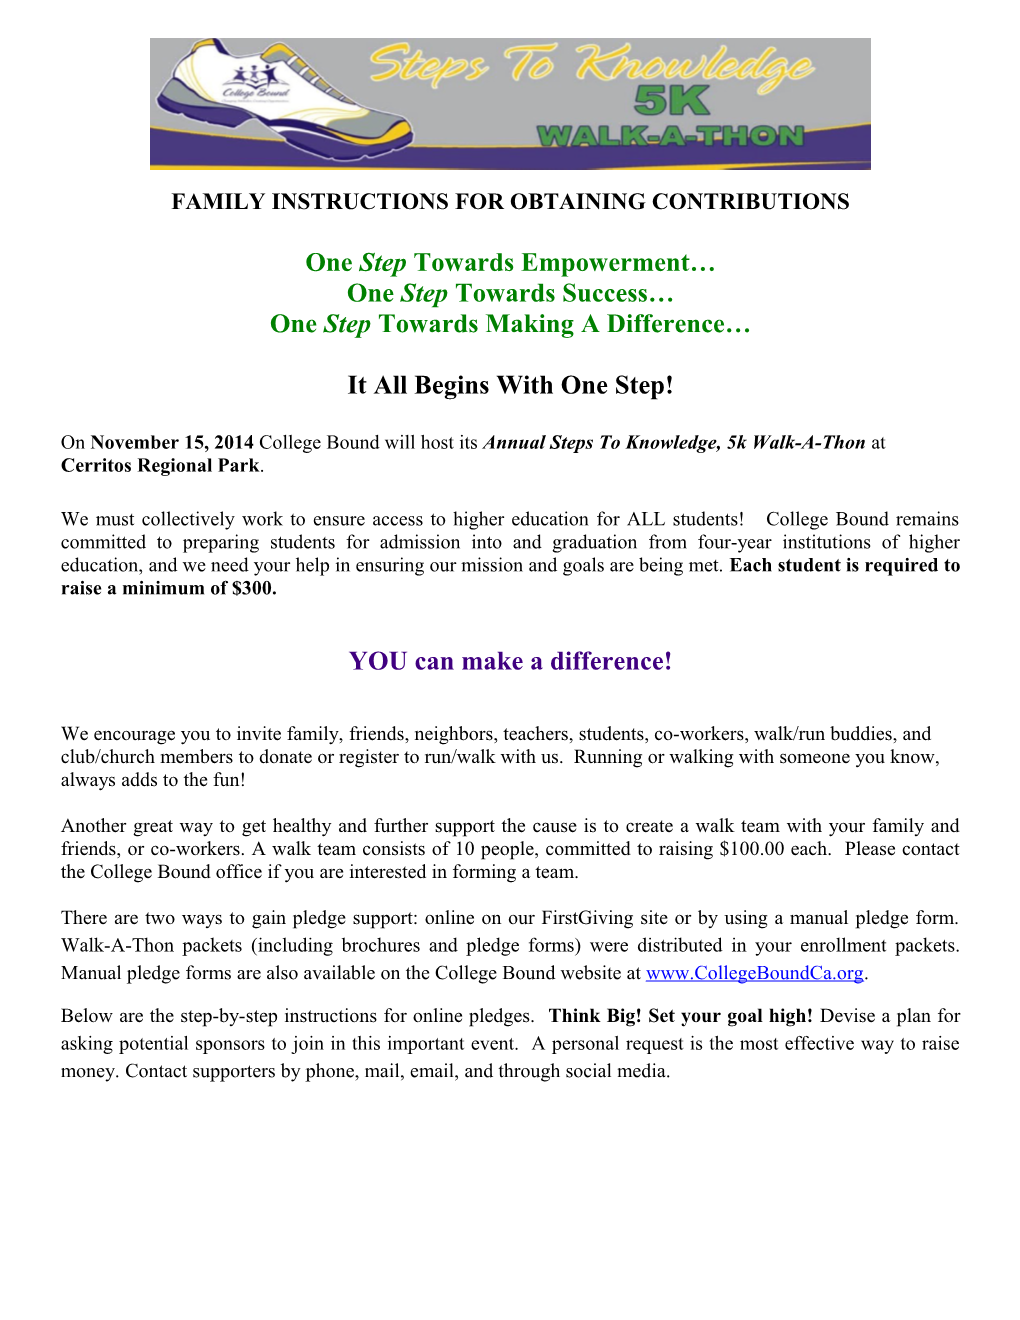 Family Instructions for Obtaining Contributions